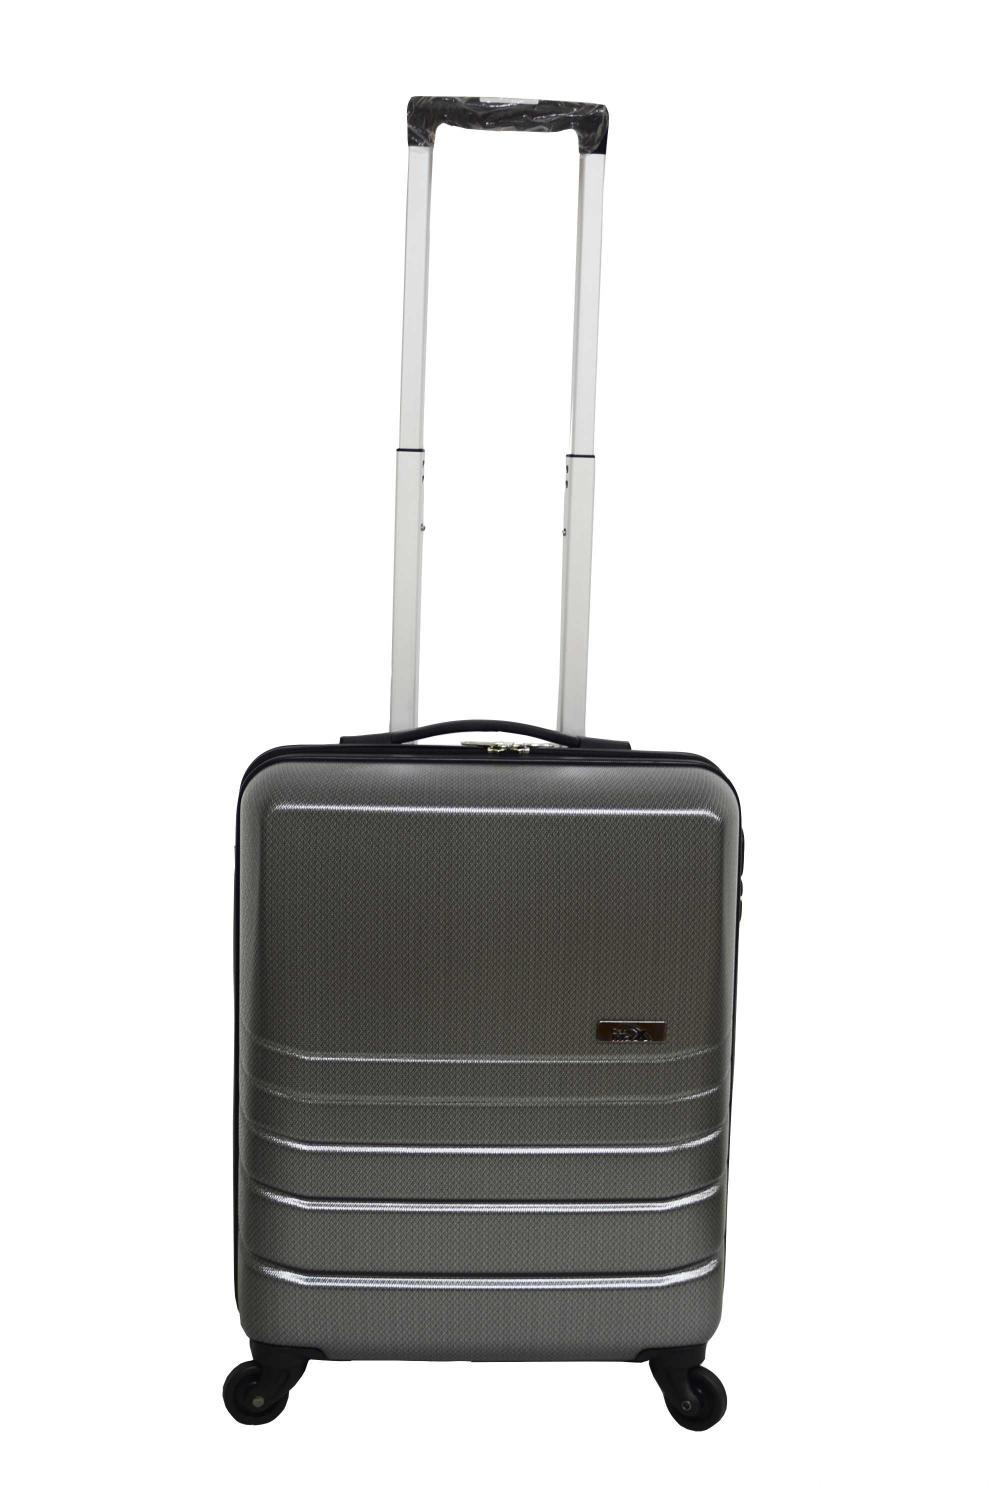 ABS Alloy material luggage